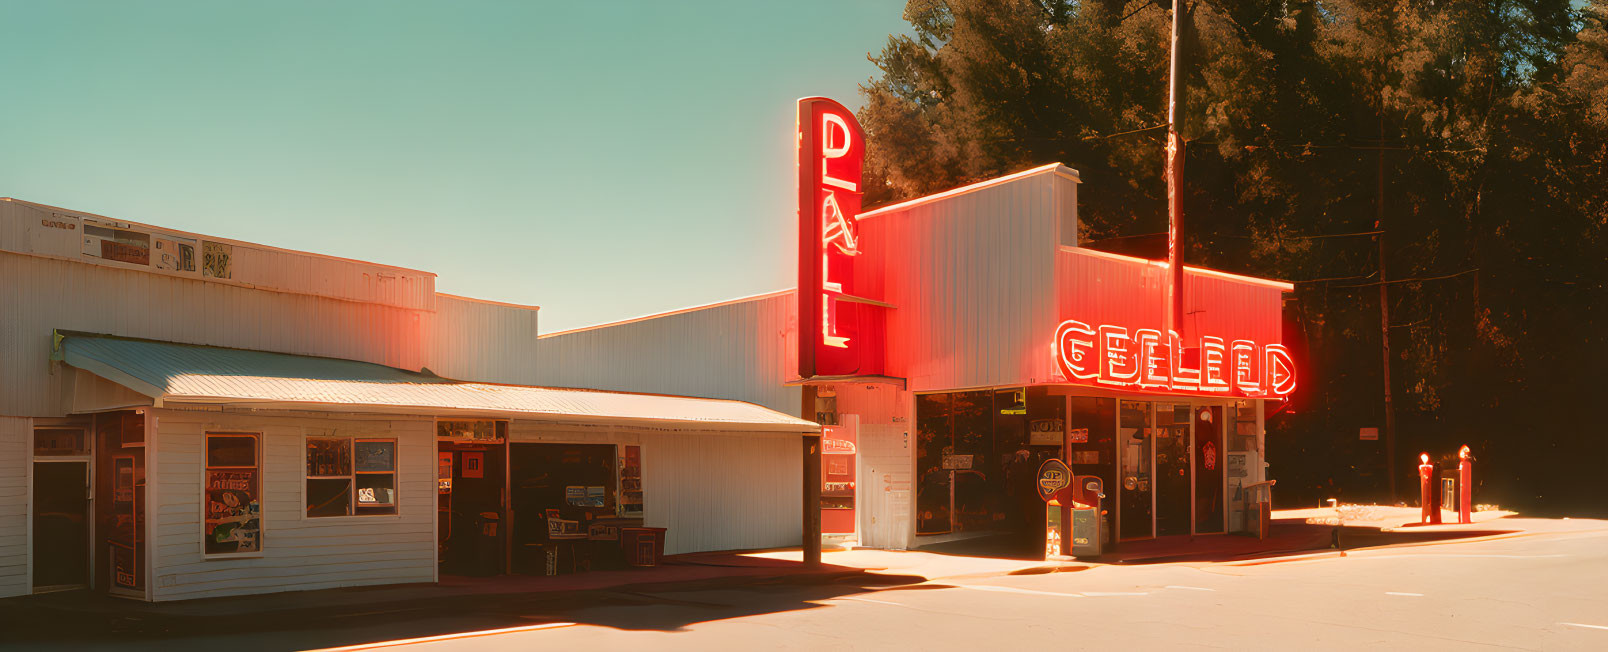 Retro gas station with red neon signs in sunny, tree-lined setting